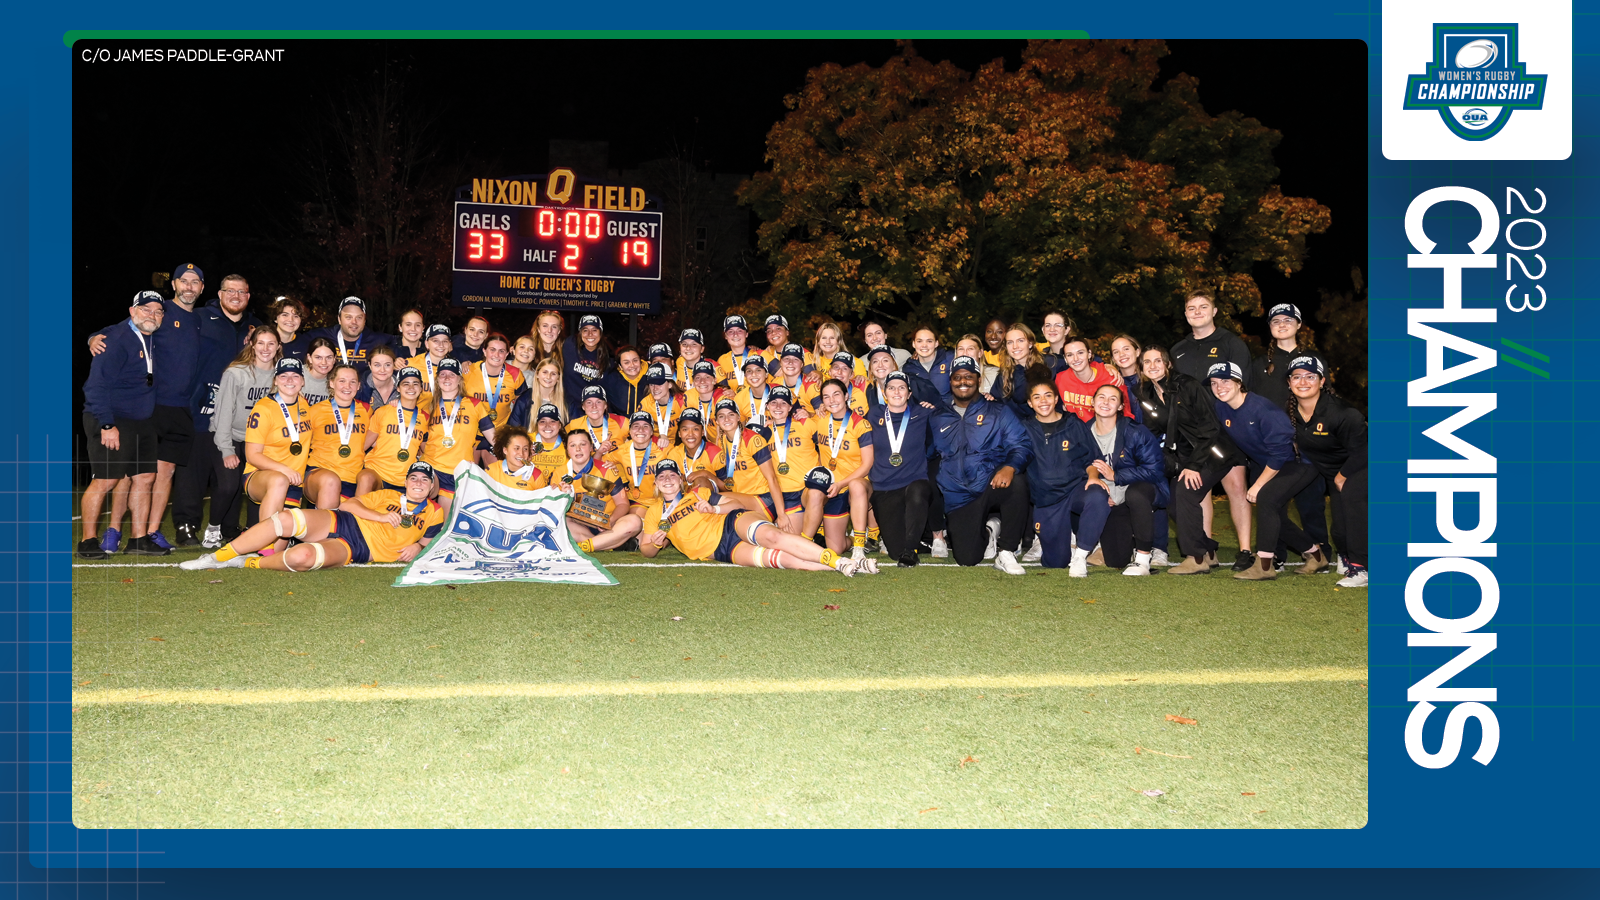 Predominantly blue graphic covered mostly by 2023 OUA Women's Rugby Championship banner photo, with the corresponding championship logo and white text reading '2023 Champions' on the right side